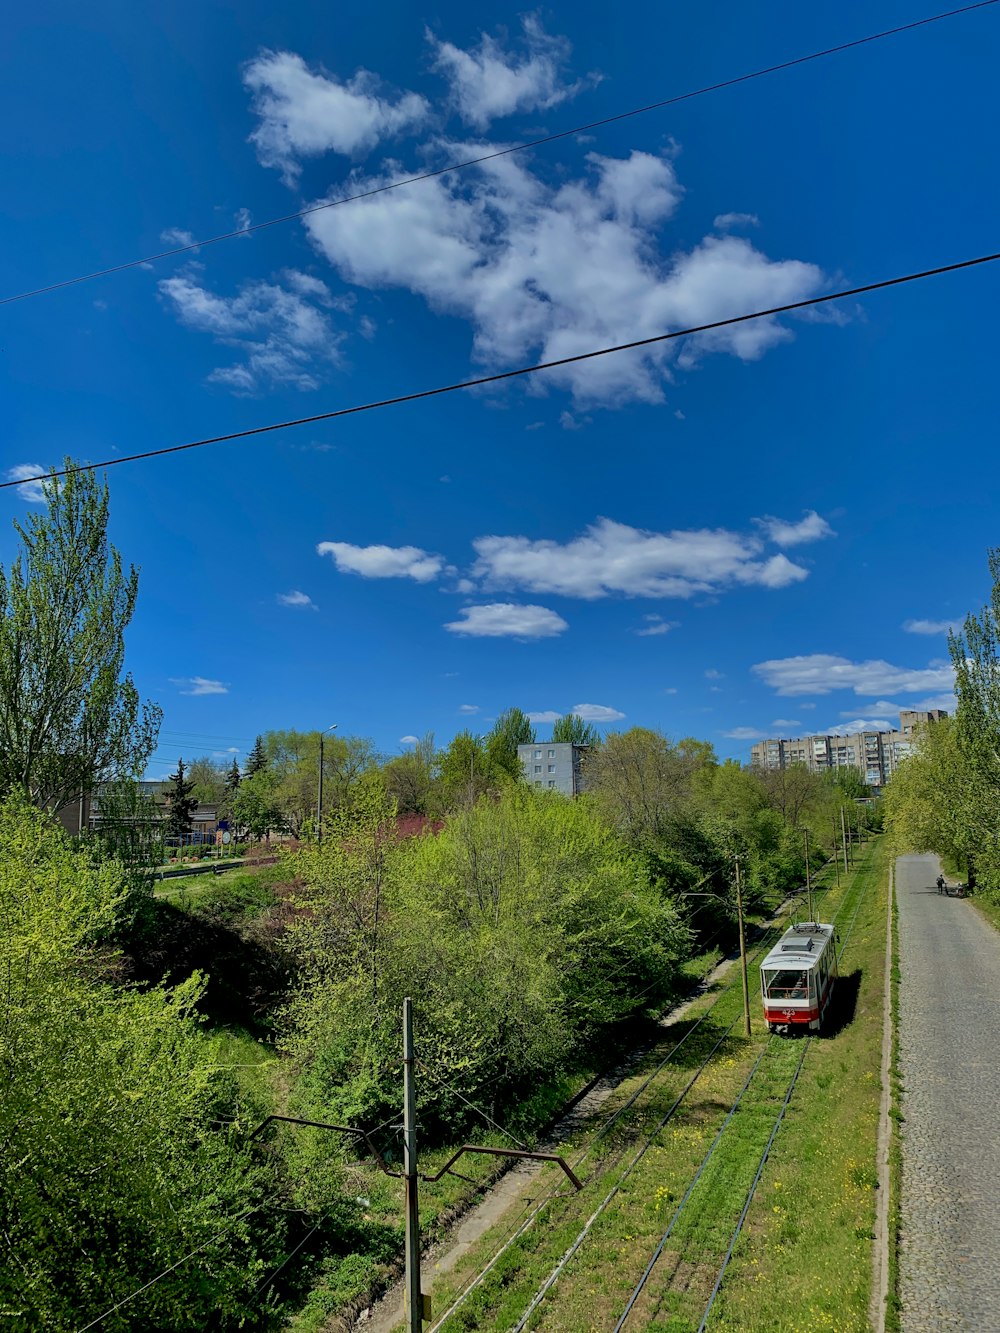 cars on road between green trees under blue sky during daytime